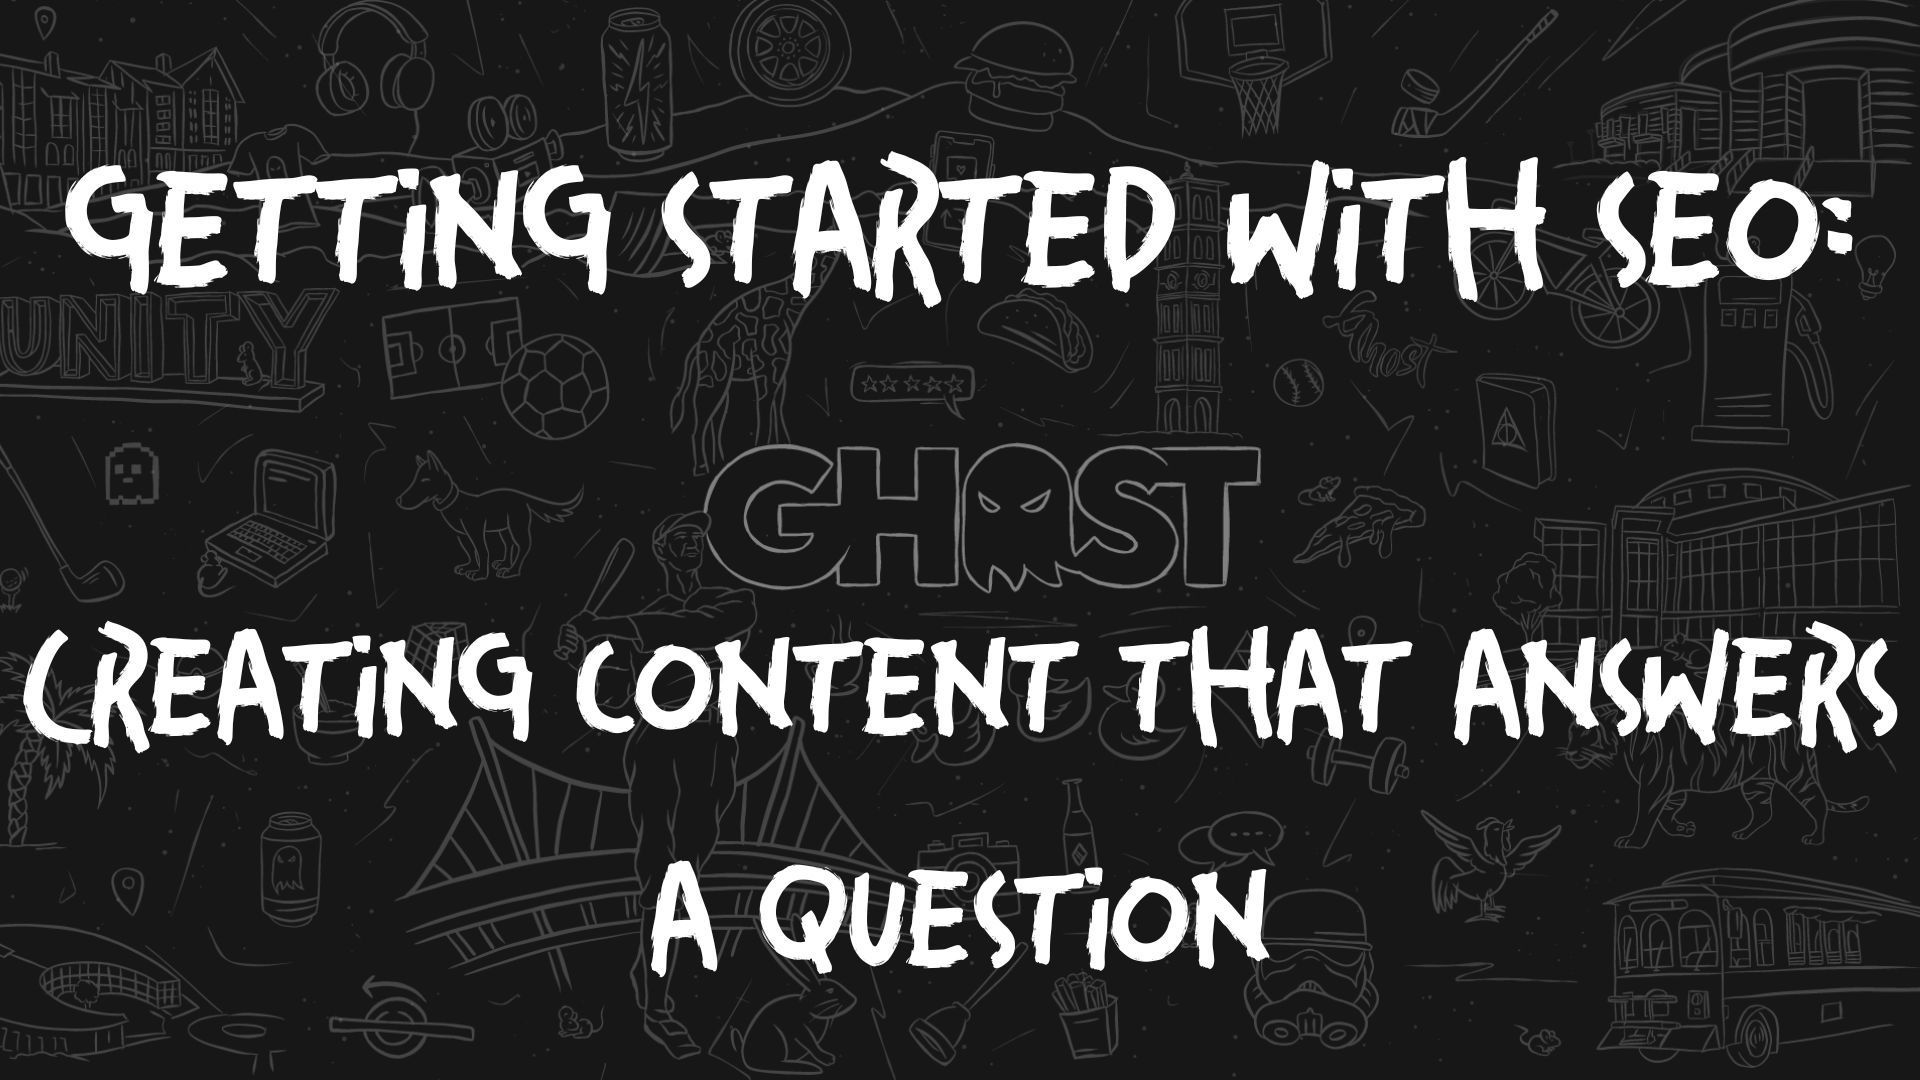 Getting Started With SEO: Creating Content that Answers a Question